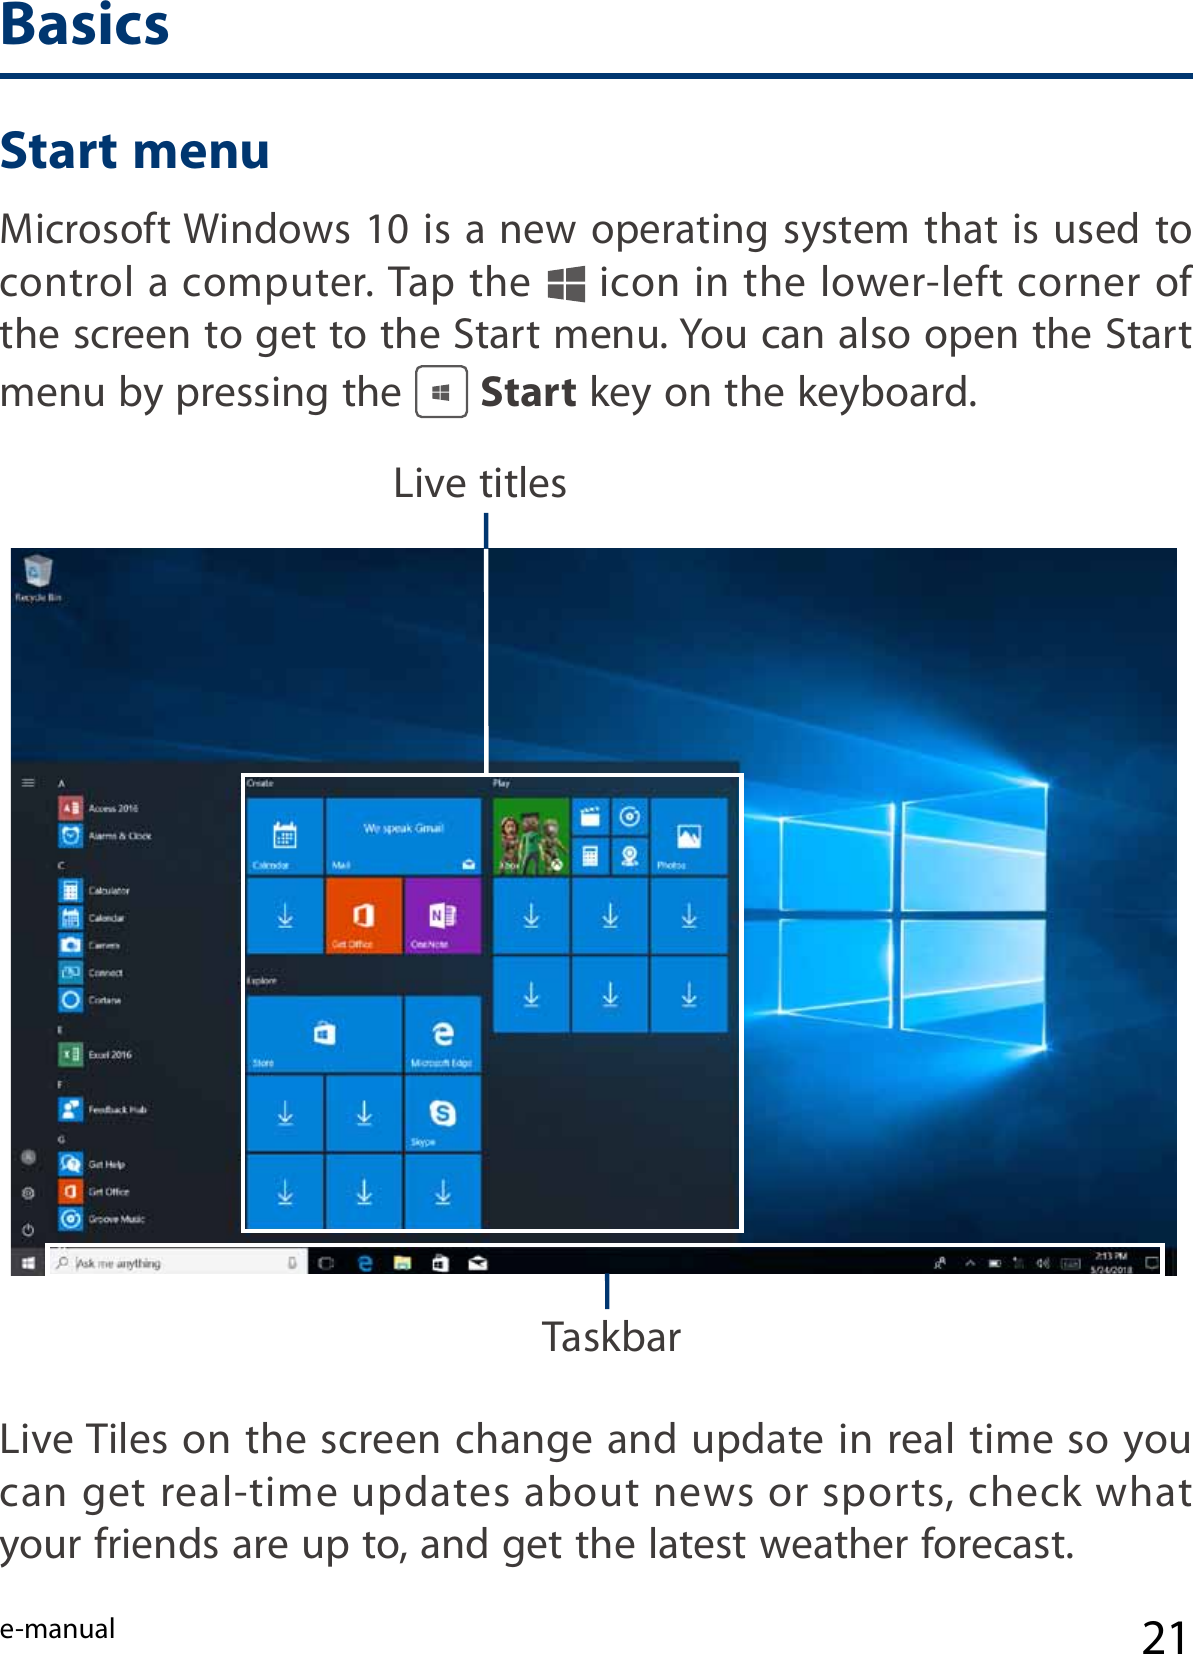 e-manual 21Microsoft Windows 10 is a new operating system that is  used to control a computer. Tap the   icon in the lower-left corner of the screen to get to the Start menu. You can also open the Start menu by pressing the   Start key on the keyboard.Live titlesTaskbarLive Tiles on the screen change and update in real time so you can get real-time updates about news or sports, check what your friends are up to, and get the latest weather forecast. BasicsStart menu